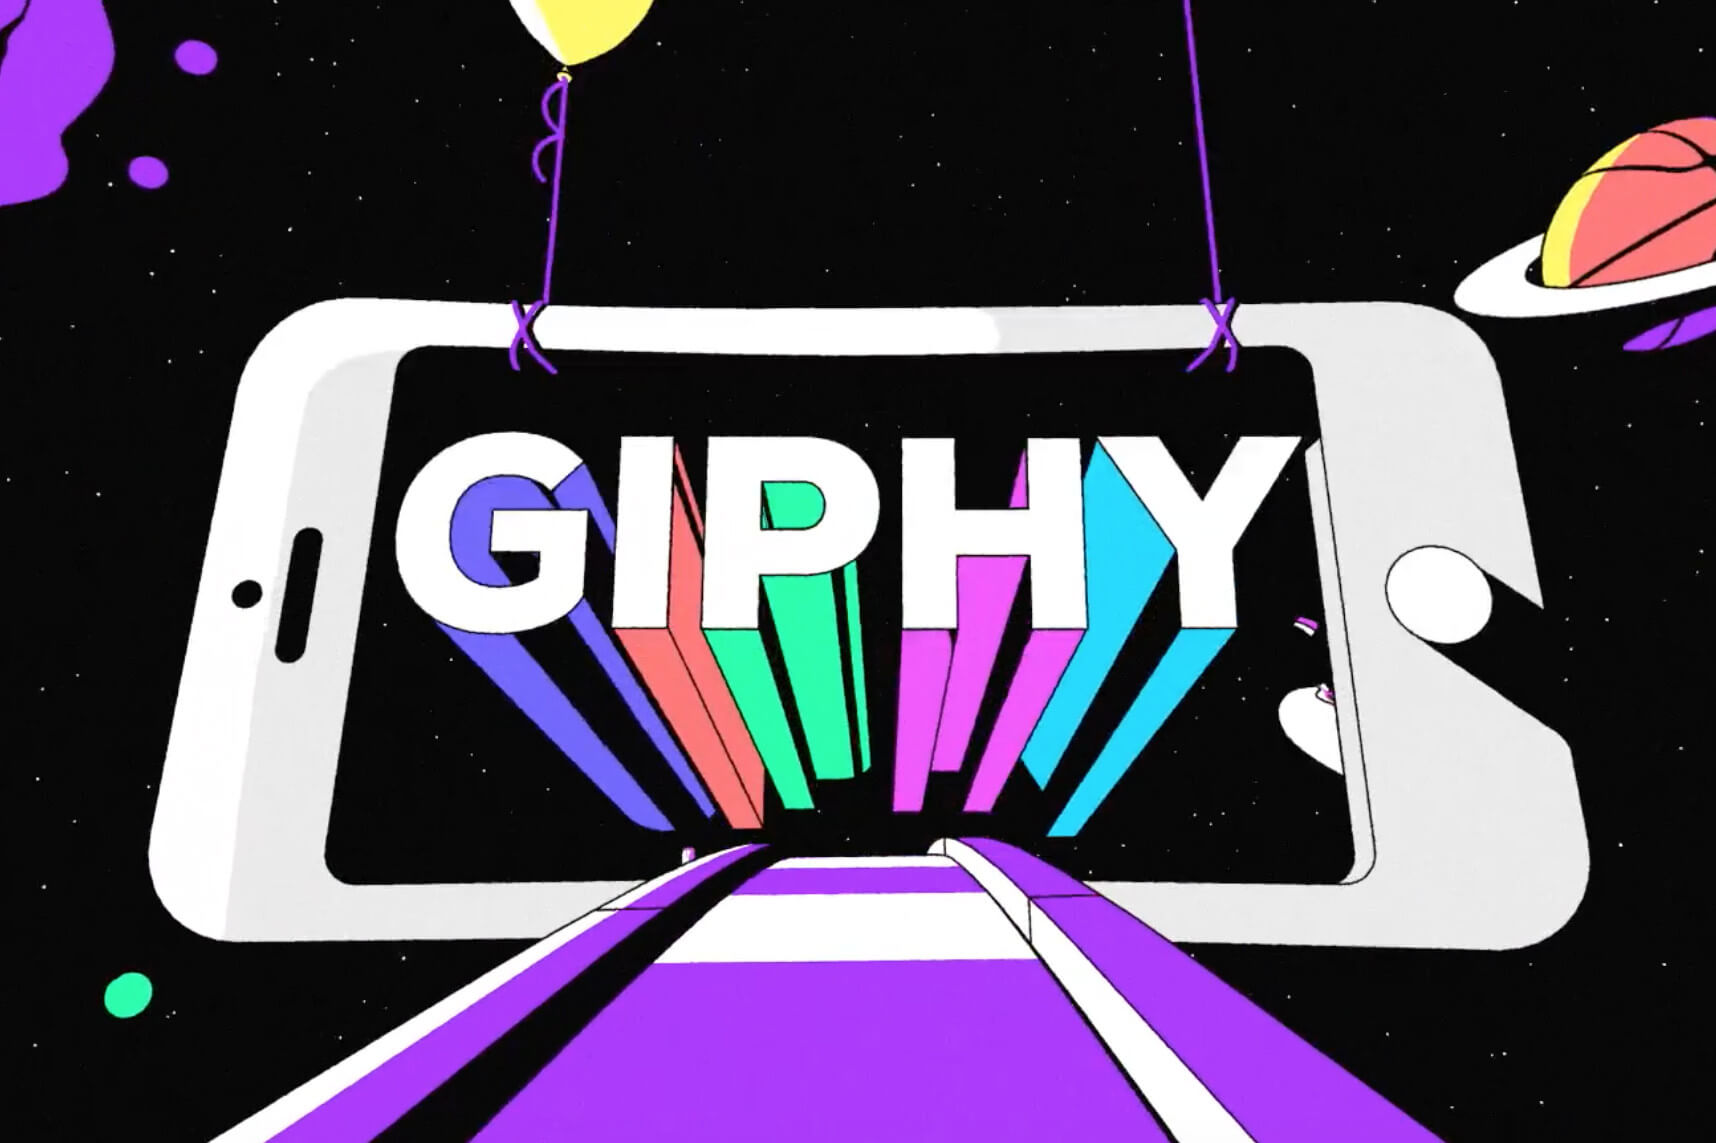 UK antitrust watchdog launches investigation into Facebook’s acquisition of Giphy